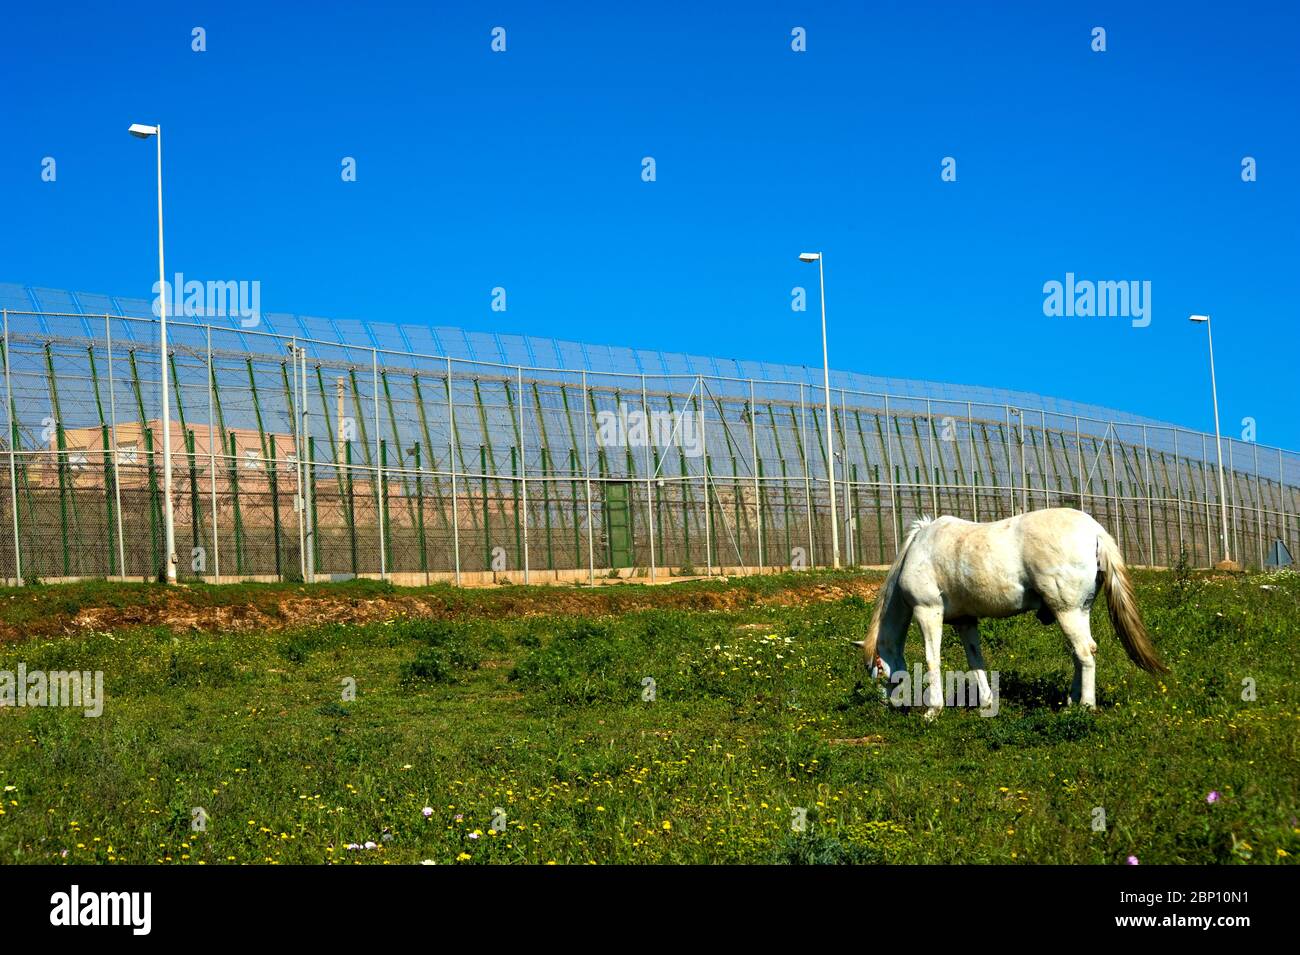 MELILLA,SPAIN-APRIL 19 : Perimeter fence that separates the Spanish enclave of Melilla and Morocco on April 19,2010 in Melilla, Spain. The fence which marks the border around the Spanish enclave in northern Morocco was build to discourage illegal immigrants from attempting to enter to Melilla.  ( Photo by Jordi Cami) Stock Photo